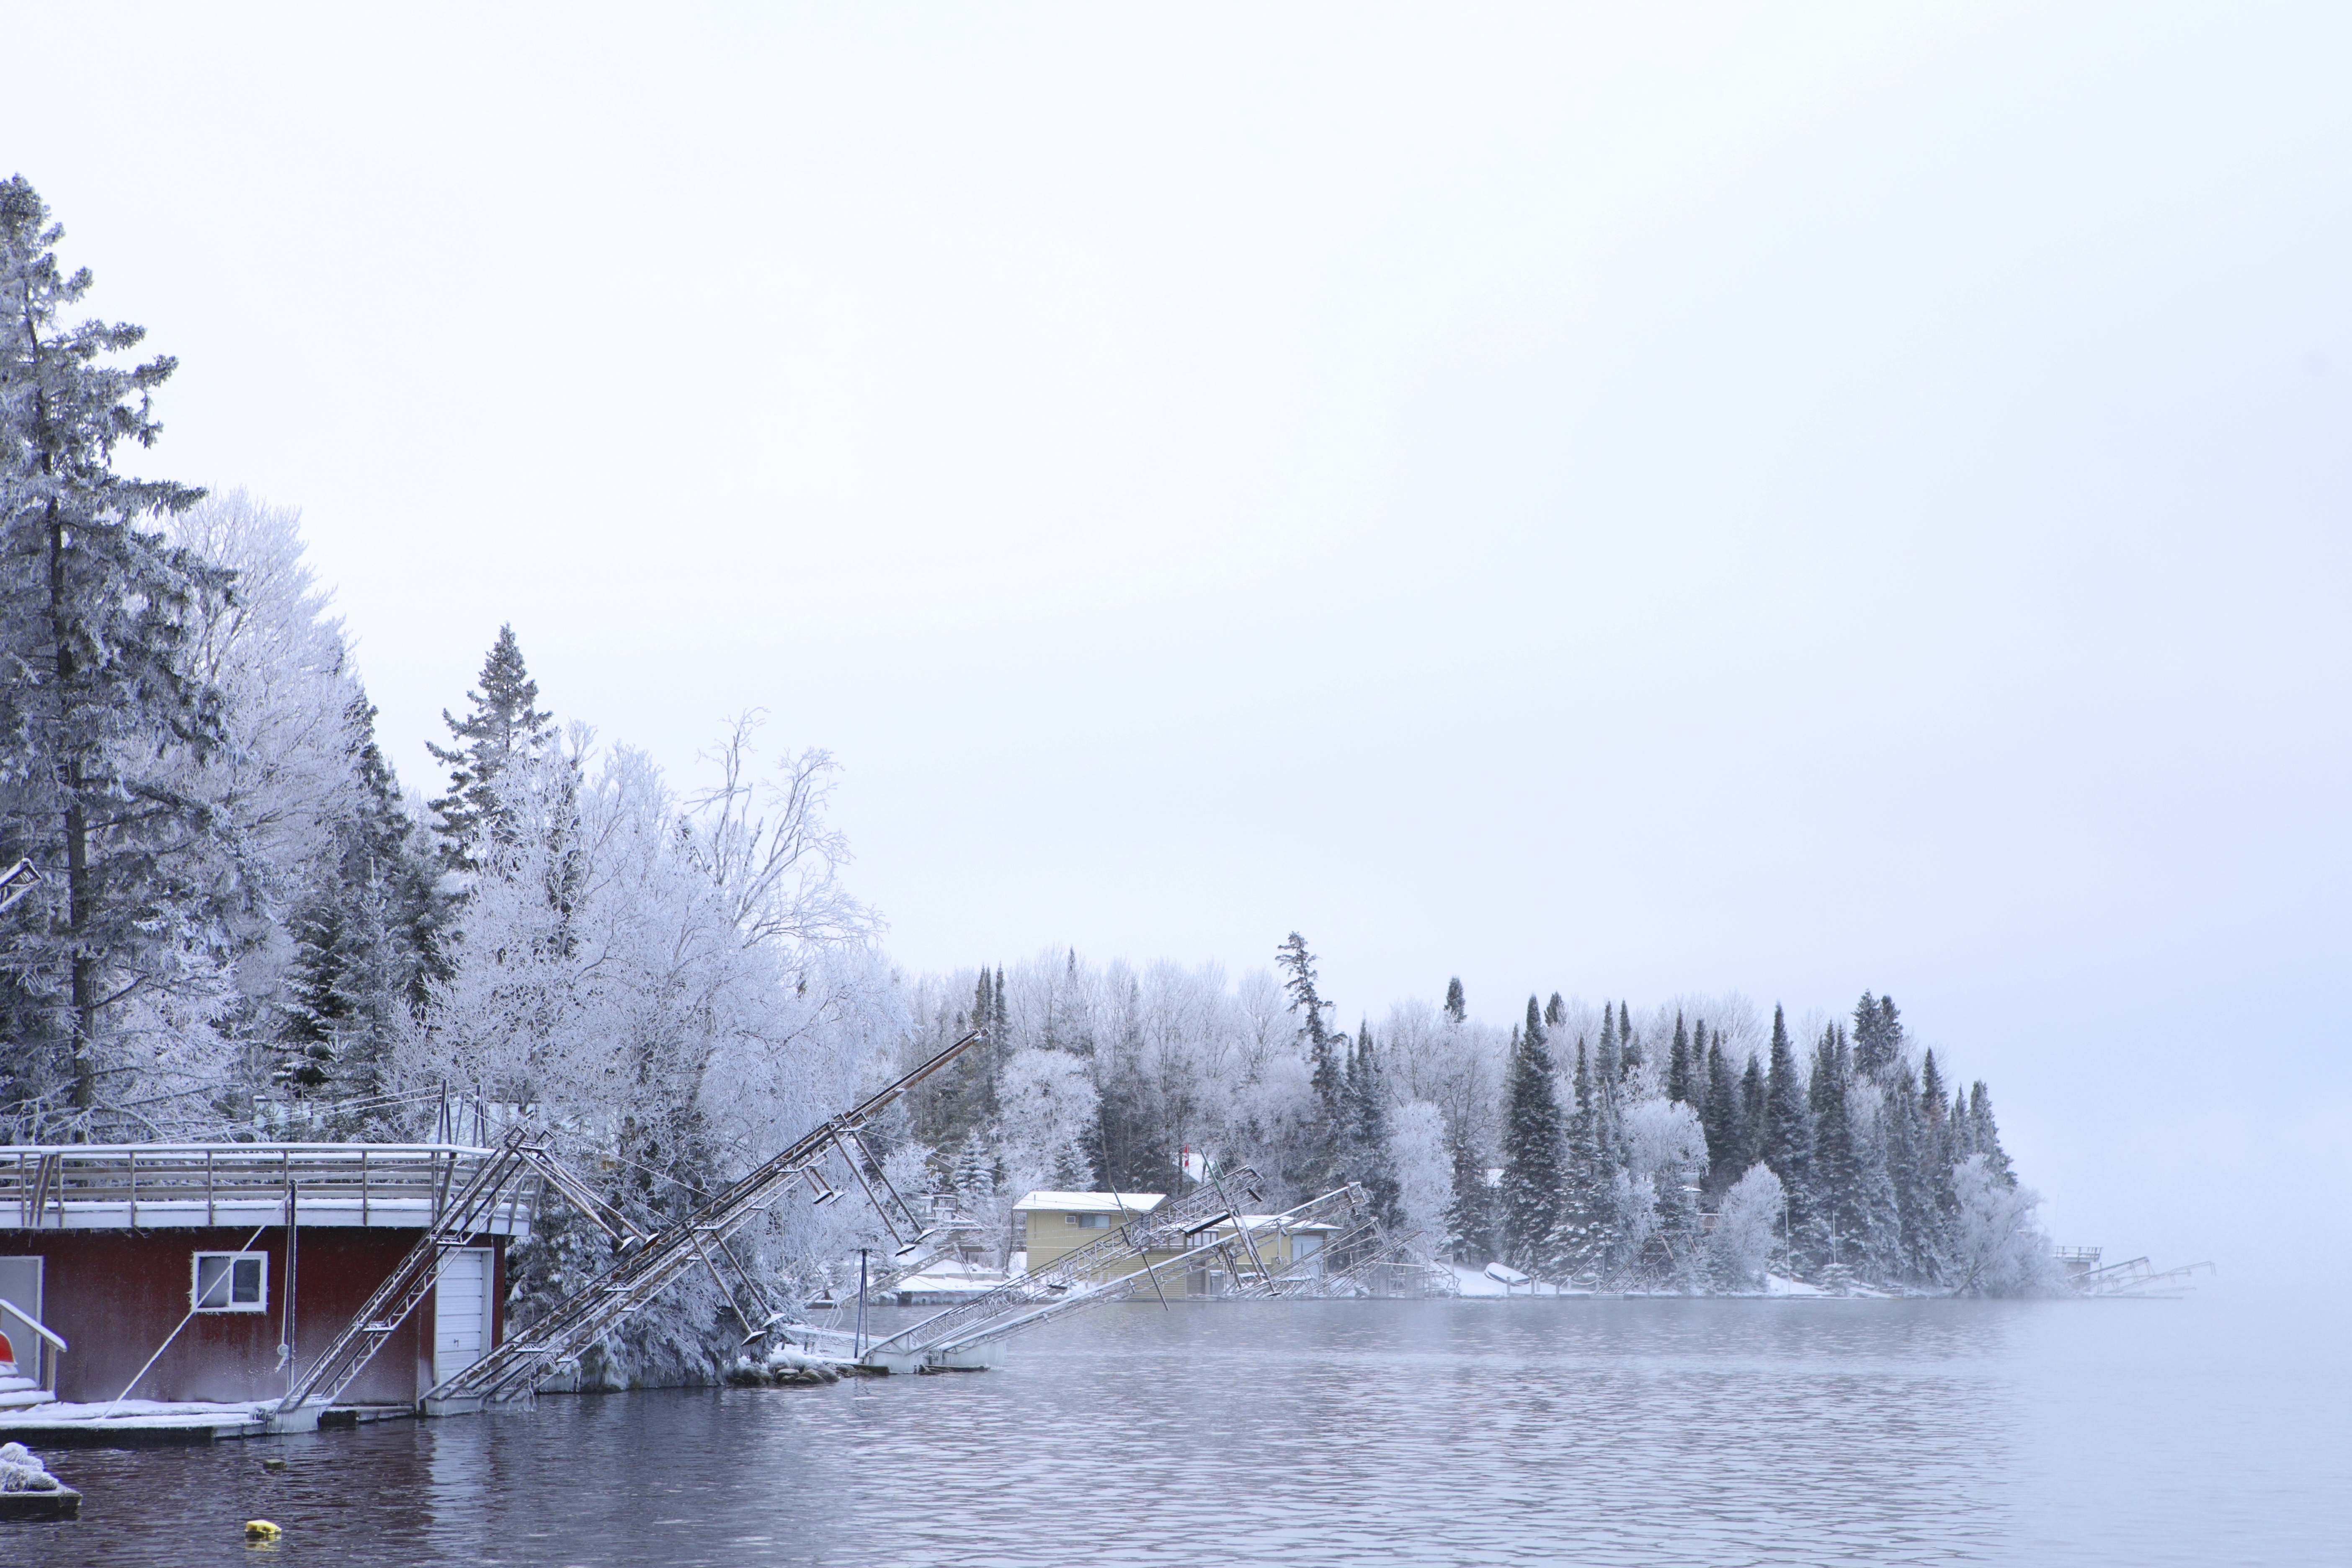 Whiteshell Winters: Brian Gould Photography | Experience the Whiteshell